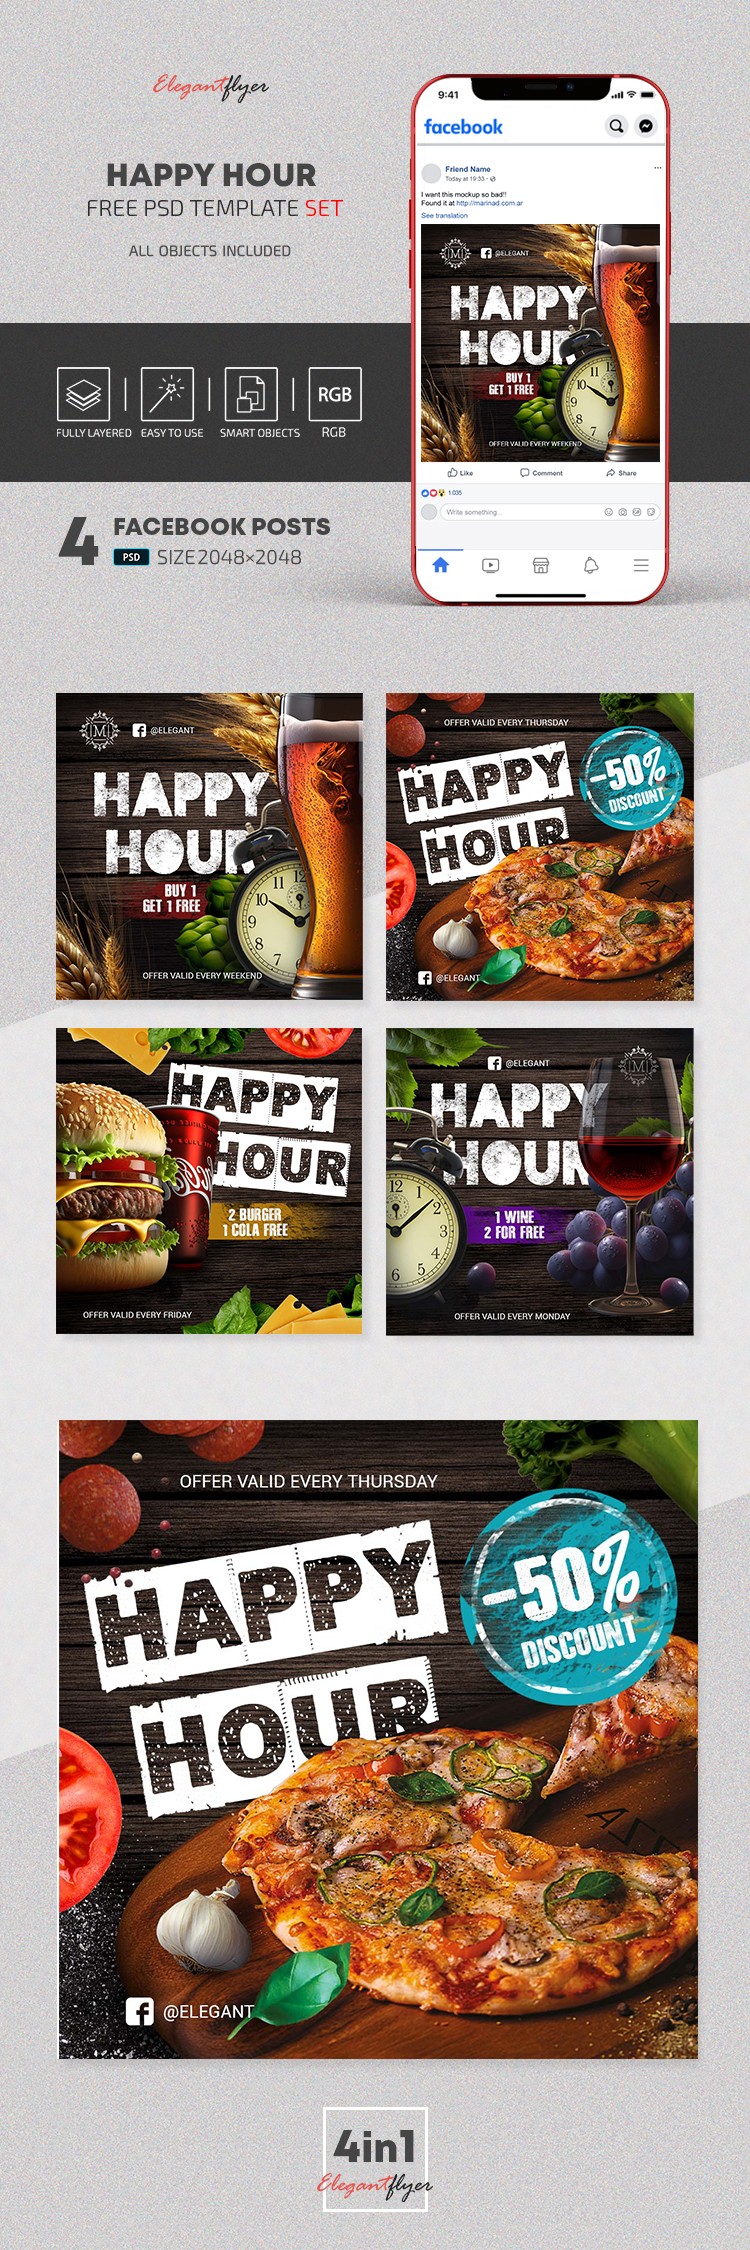 Happy Hour - Free Facebook Post Templates Set in PSD by ElegantFlyer